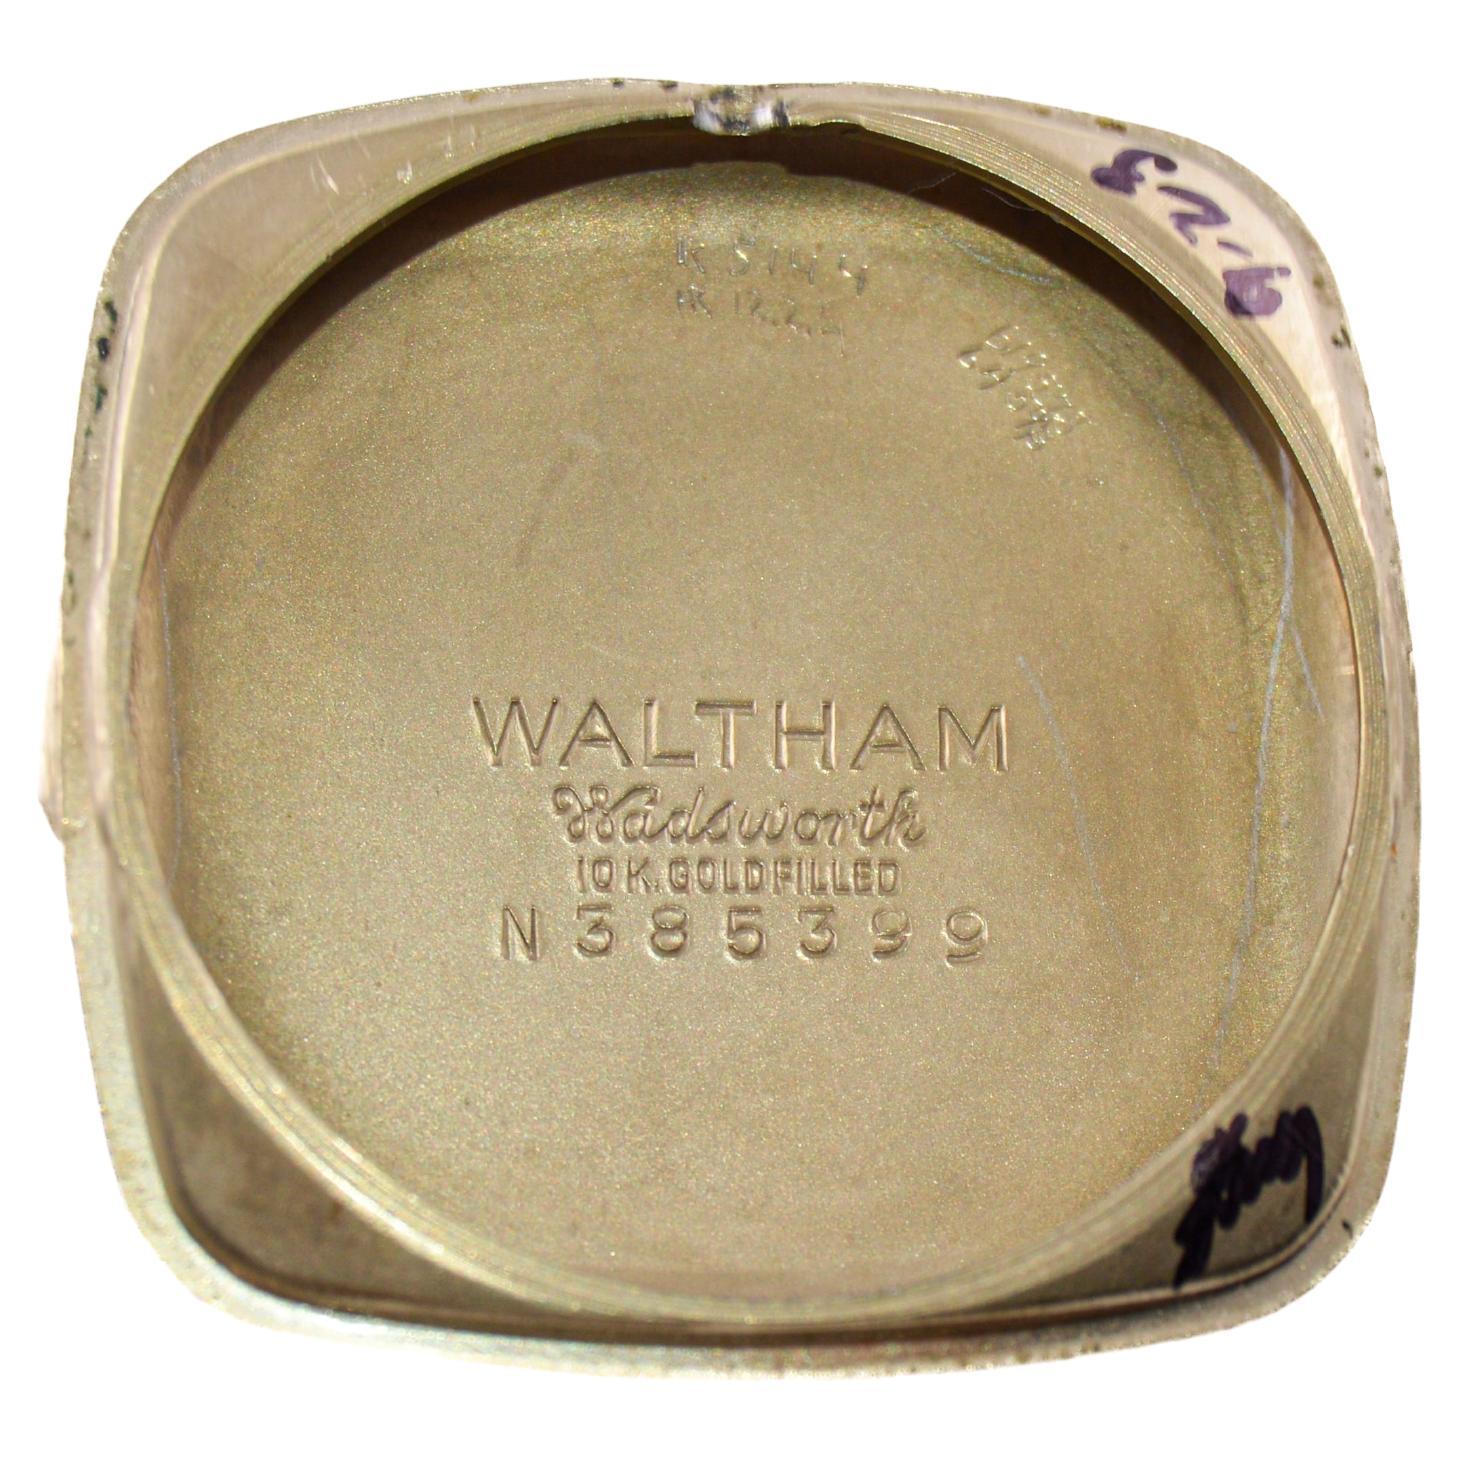 Waltham Gold Filled Art Deco Cushion Shaped Watch with Original Dial from 1940's For Sale 5